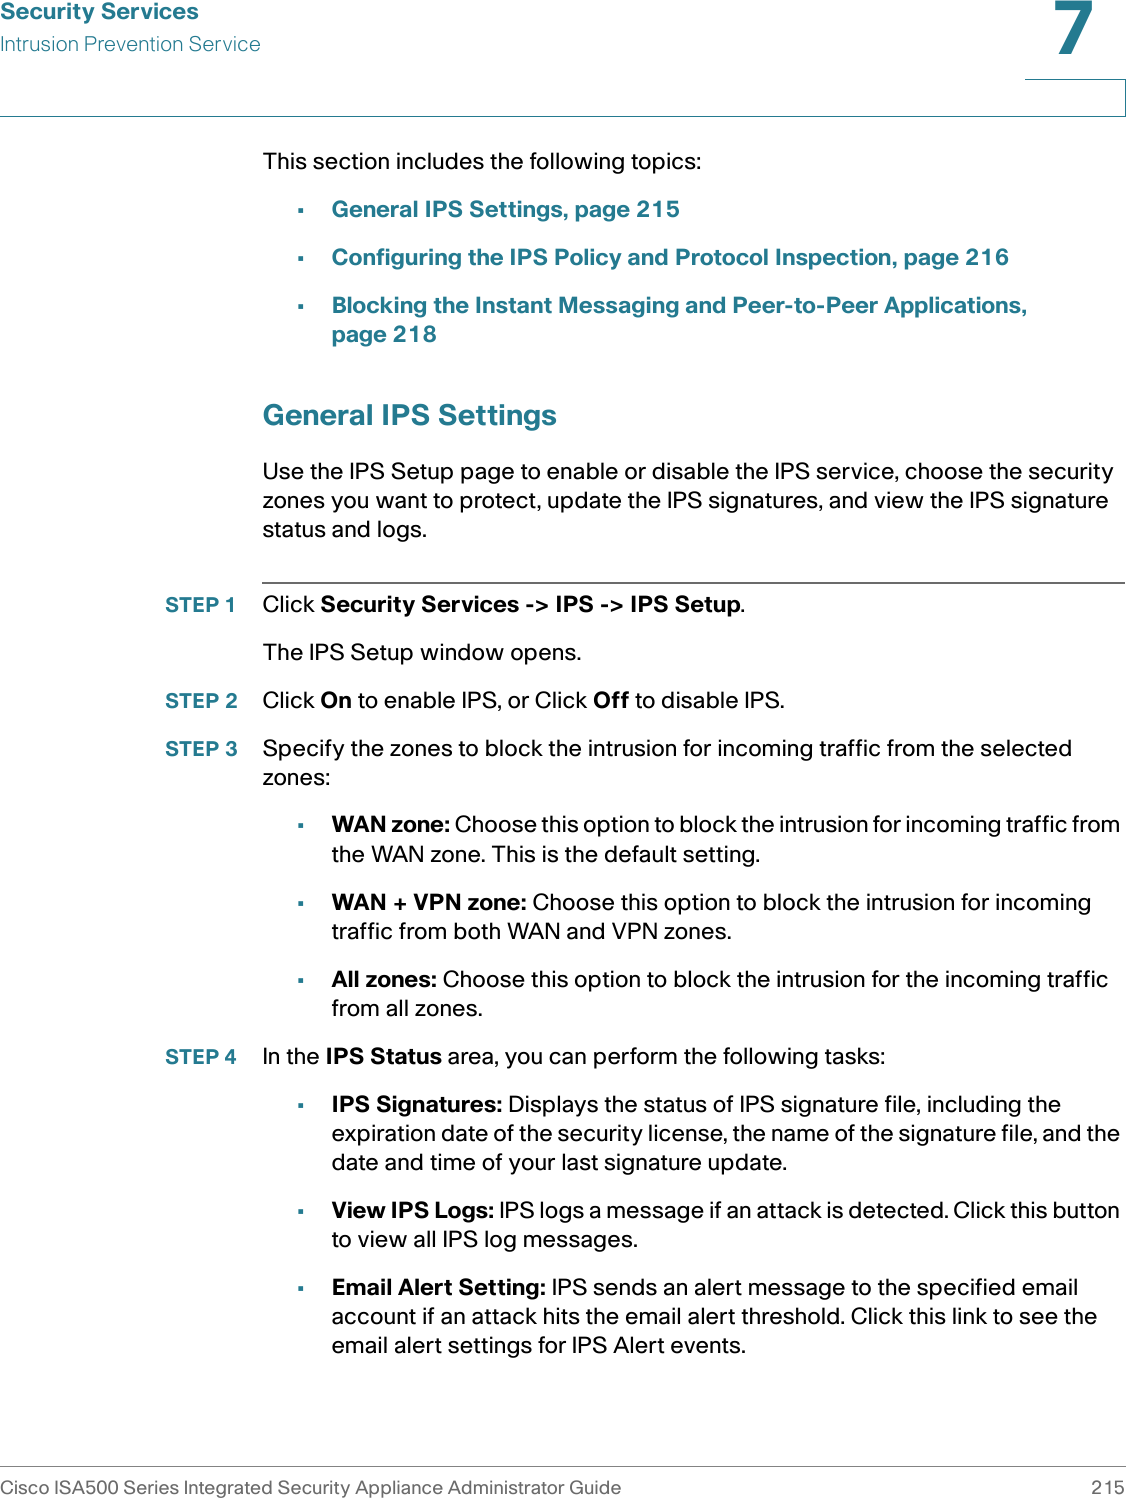 Security ServicesIntrusion Prevention ServiceCisco ISA500 Series Integrated Security Appliance Administrator Guide 2157 This section includes the following topics: •General IPS Settings, page 215•Configuring the IPS Policy and Protocol Inspection, page 216•Blocking the Instant Messaging and Peer-to-Peer Applications, page 218General IPS SettingsUse the IPS Setup page to enable or disable the IPS service, choose the security zones you want to protect, update the IPS signatures, and view the IPS signature status and logs.STEP 1 Click Security Services -&gt; IPS -&gt; IPS Setup. The IPS Setup window opens. STEP 2 Click On to enable IPS, or Click Off to disable IPS. STEP 3 Specify the zones to block the intrusion for incoming traffic from the selected zones: •WAN zone: Choose this option to block the intrusion for incoming traffic from the WAN zone. This is the default setting. •WAN + VPN zone: Choose this option to block the intrusion for incoming traffic from both WAN and VPN zones.•All zones: Choose this option to block the intrusion for the incoming traffic from all zones. STEP 4 In the IPS Status area, you can perform the following tasks: •IPS Signatures: Displays the status of IPS signature file, including the expiration date of the security license, the name of the signature file, and the date and time of your last signature update. •View IPS Logs: IPS logs a message if an attack is detected. Click this button to view all IPS log messages. •Email Alert Setting: IPS sends an alert message to the specified email account if an attack hits the email alert threshold. Click this link to see the email alert settings for IPS Alert events. 